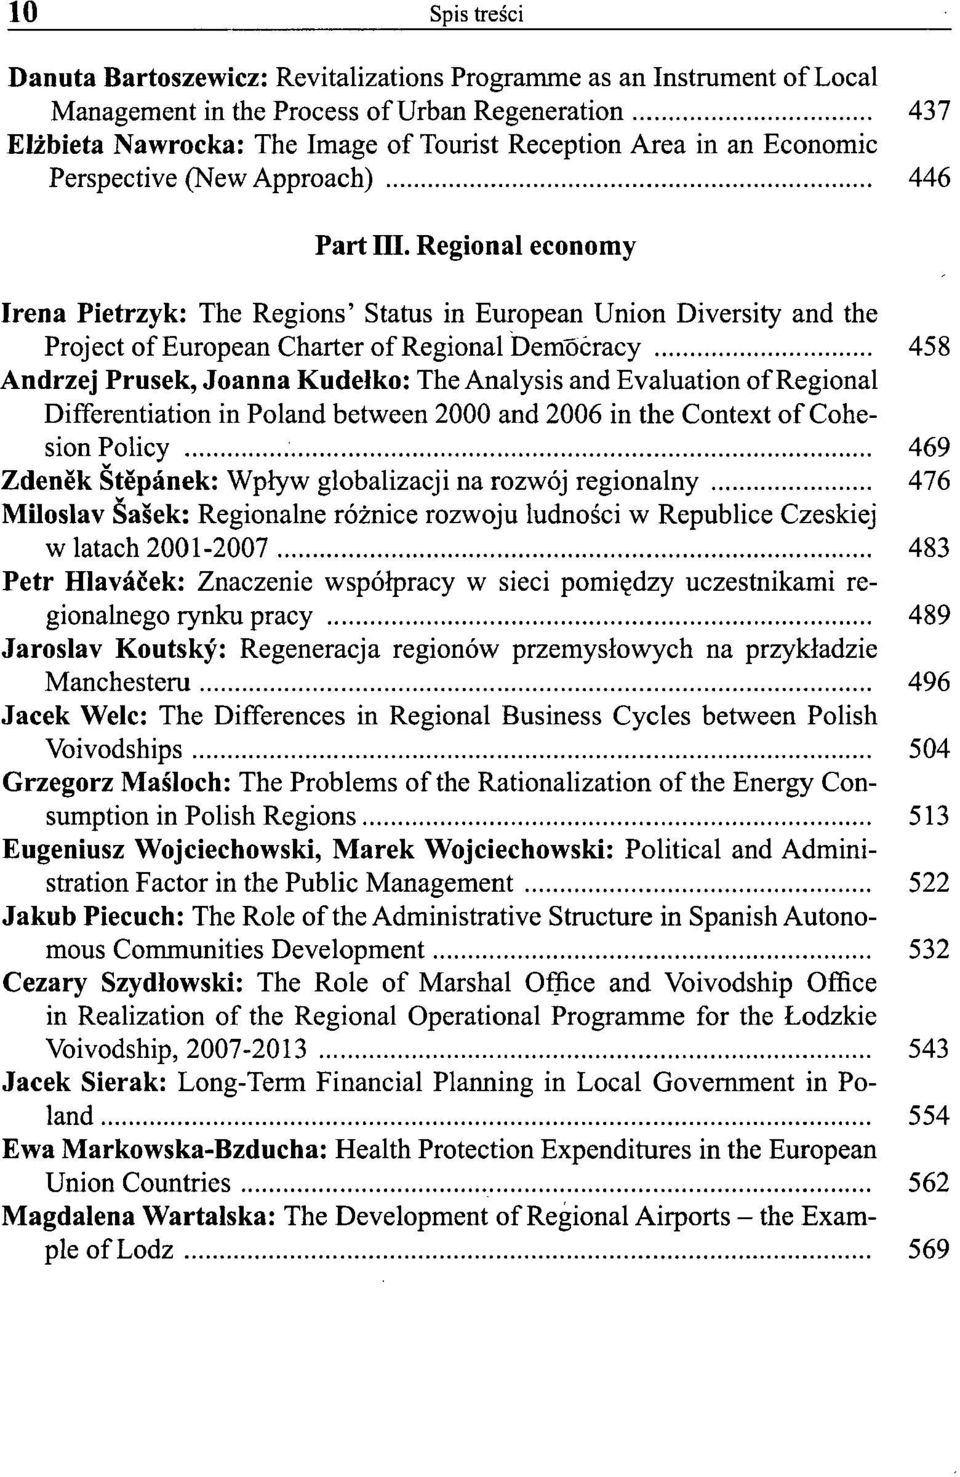 Regional economy Irena Pietrzyk: The Regions' Status in European Union Diversity and the Project of European Charter of Regional Demóóracy 458 Andrzej Prusek, Joanna Kudelko: The Analysis and